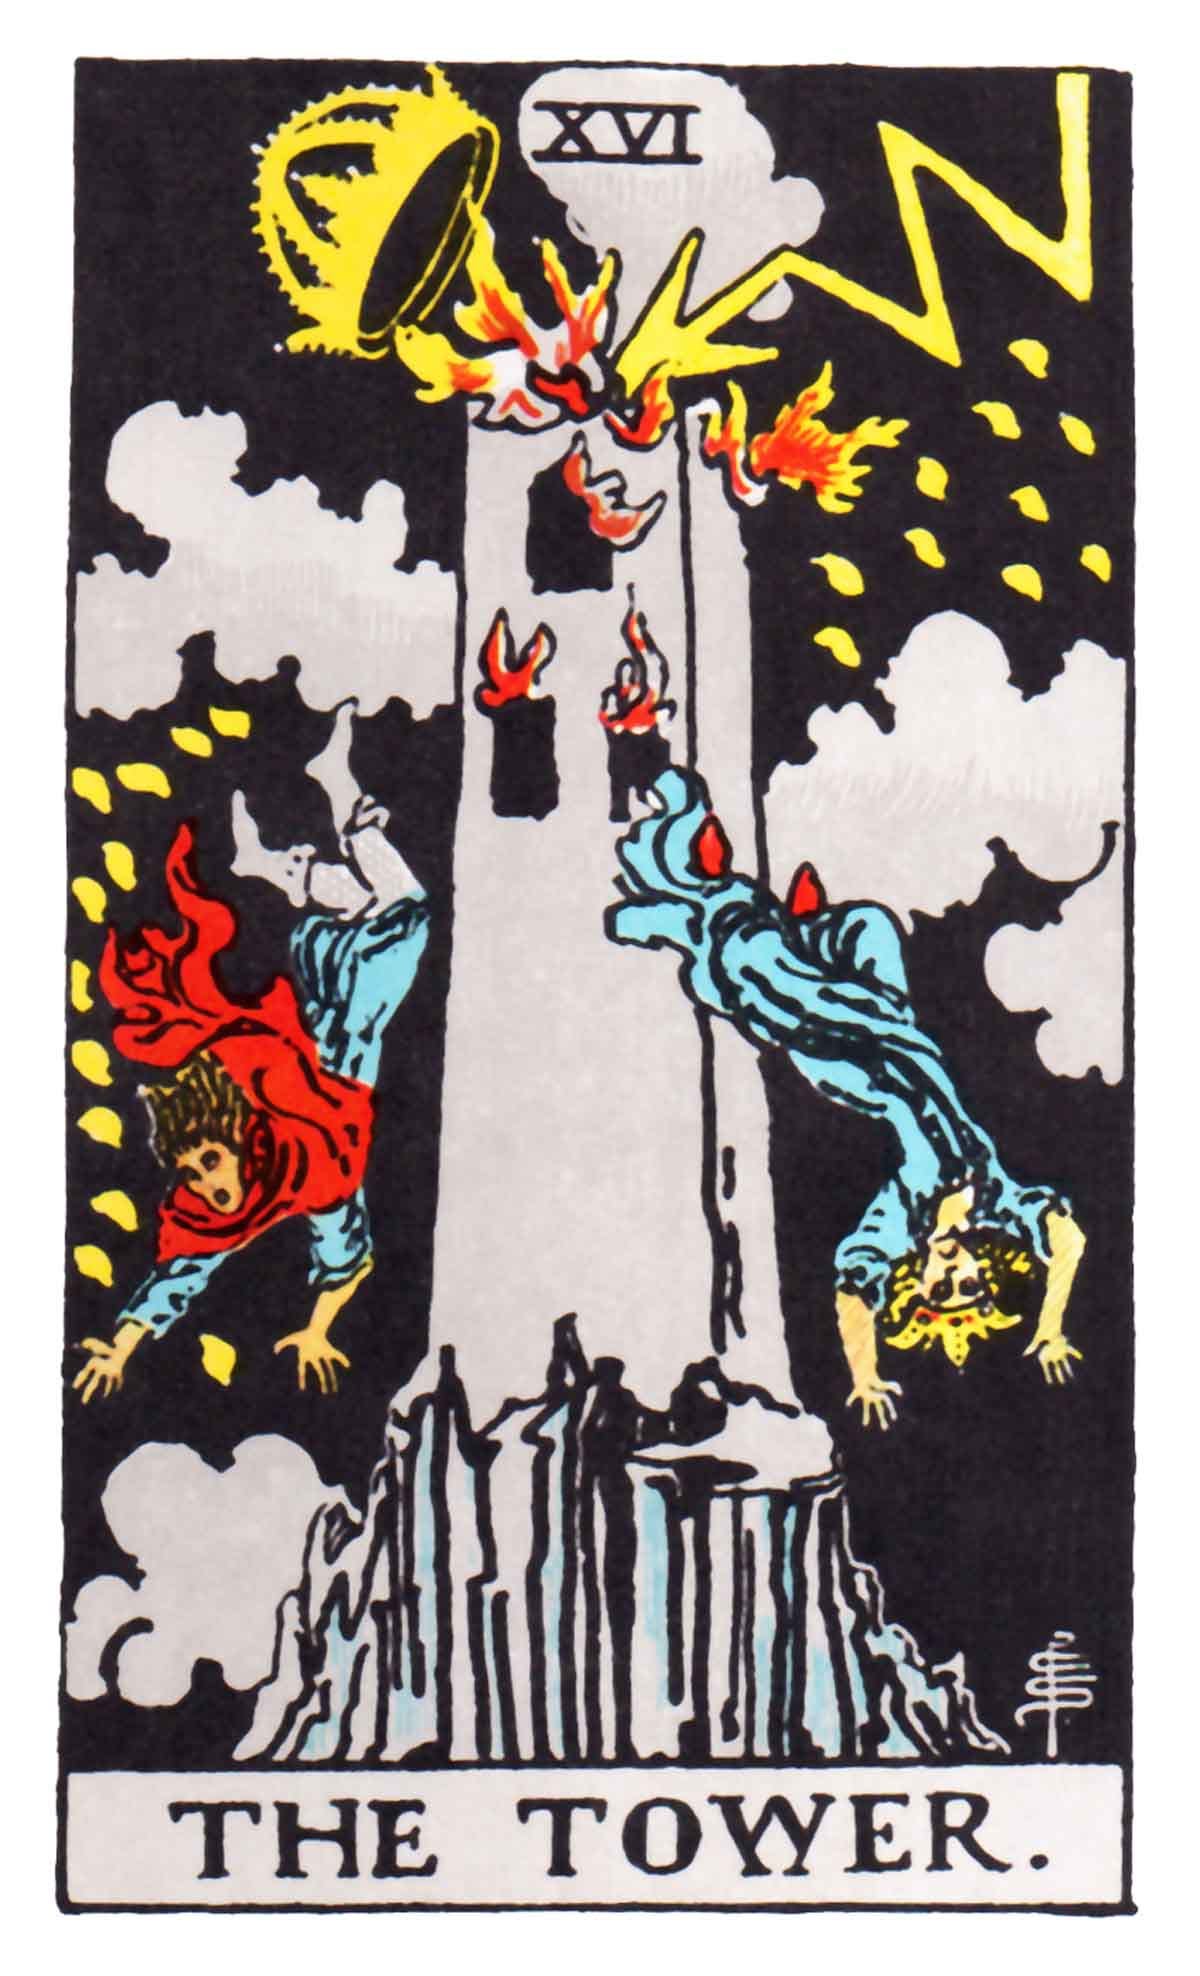 The Tower Tarot Card Meaning According to A. E. Waite